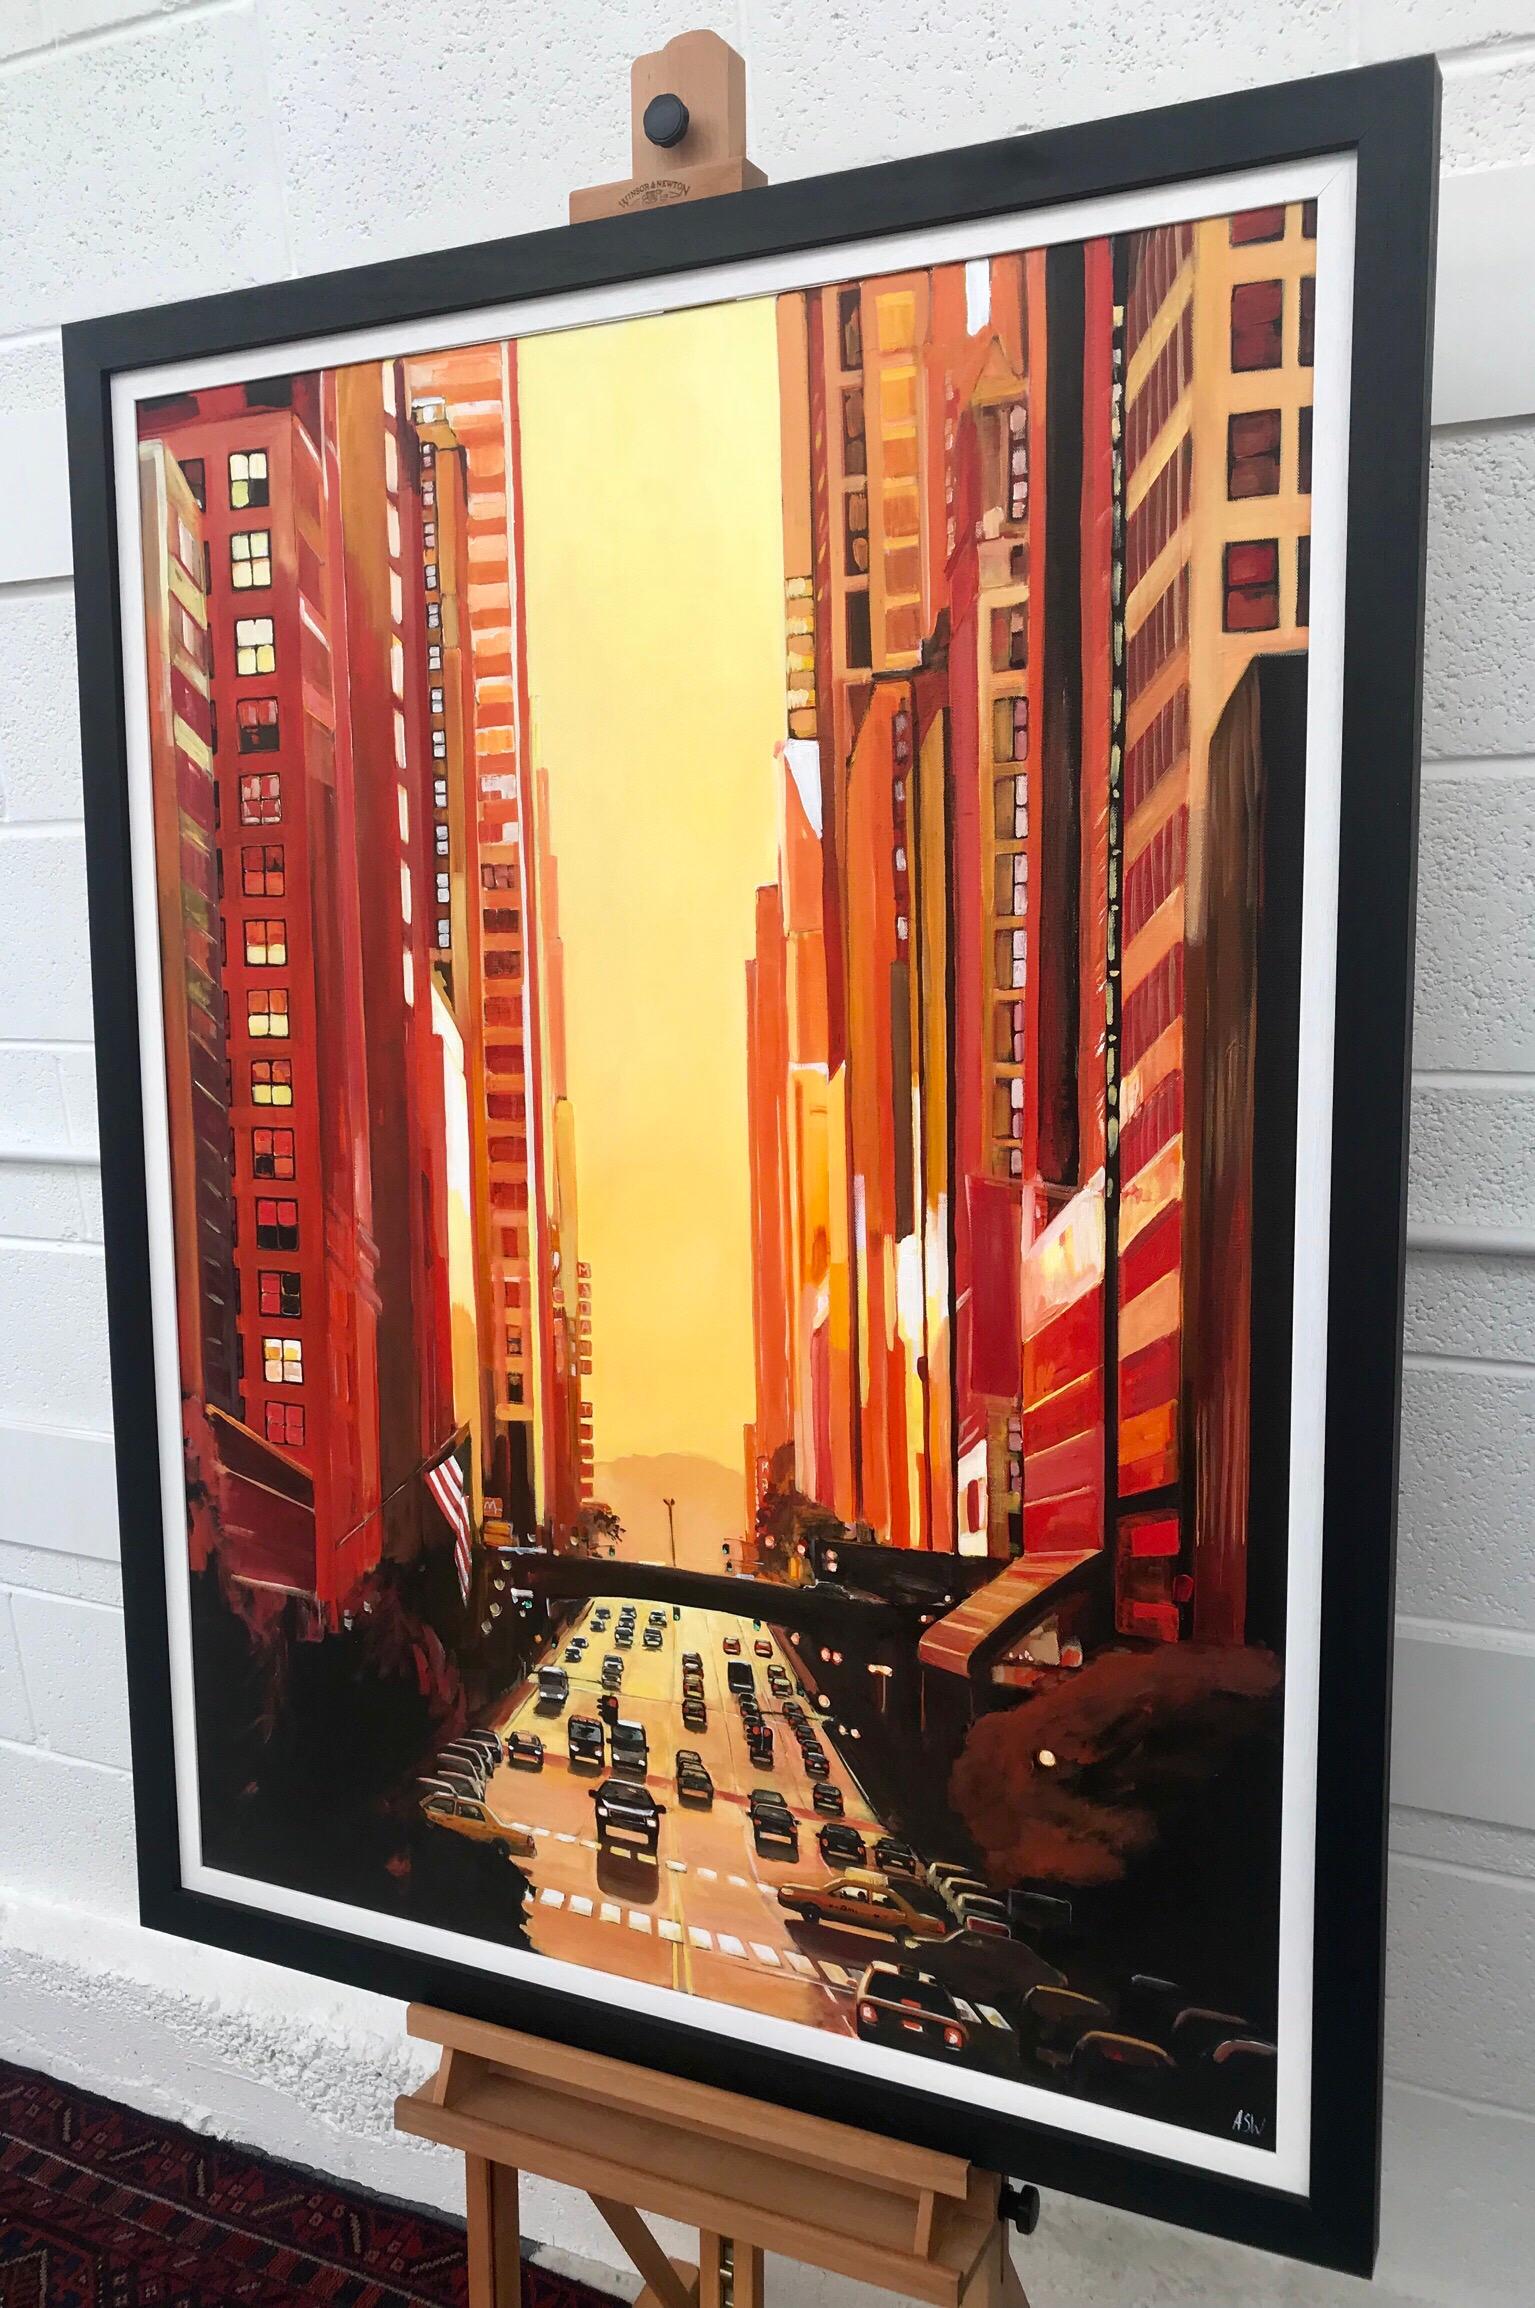 New York Sunshine Golden Glow Cityscape Painting by British Urban Landscape Artist Angela Wakefield. This original is part of the New York Series, a body of work featured in exhibitions across England, and featured in Art of England magazine as part